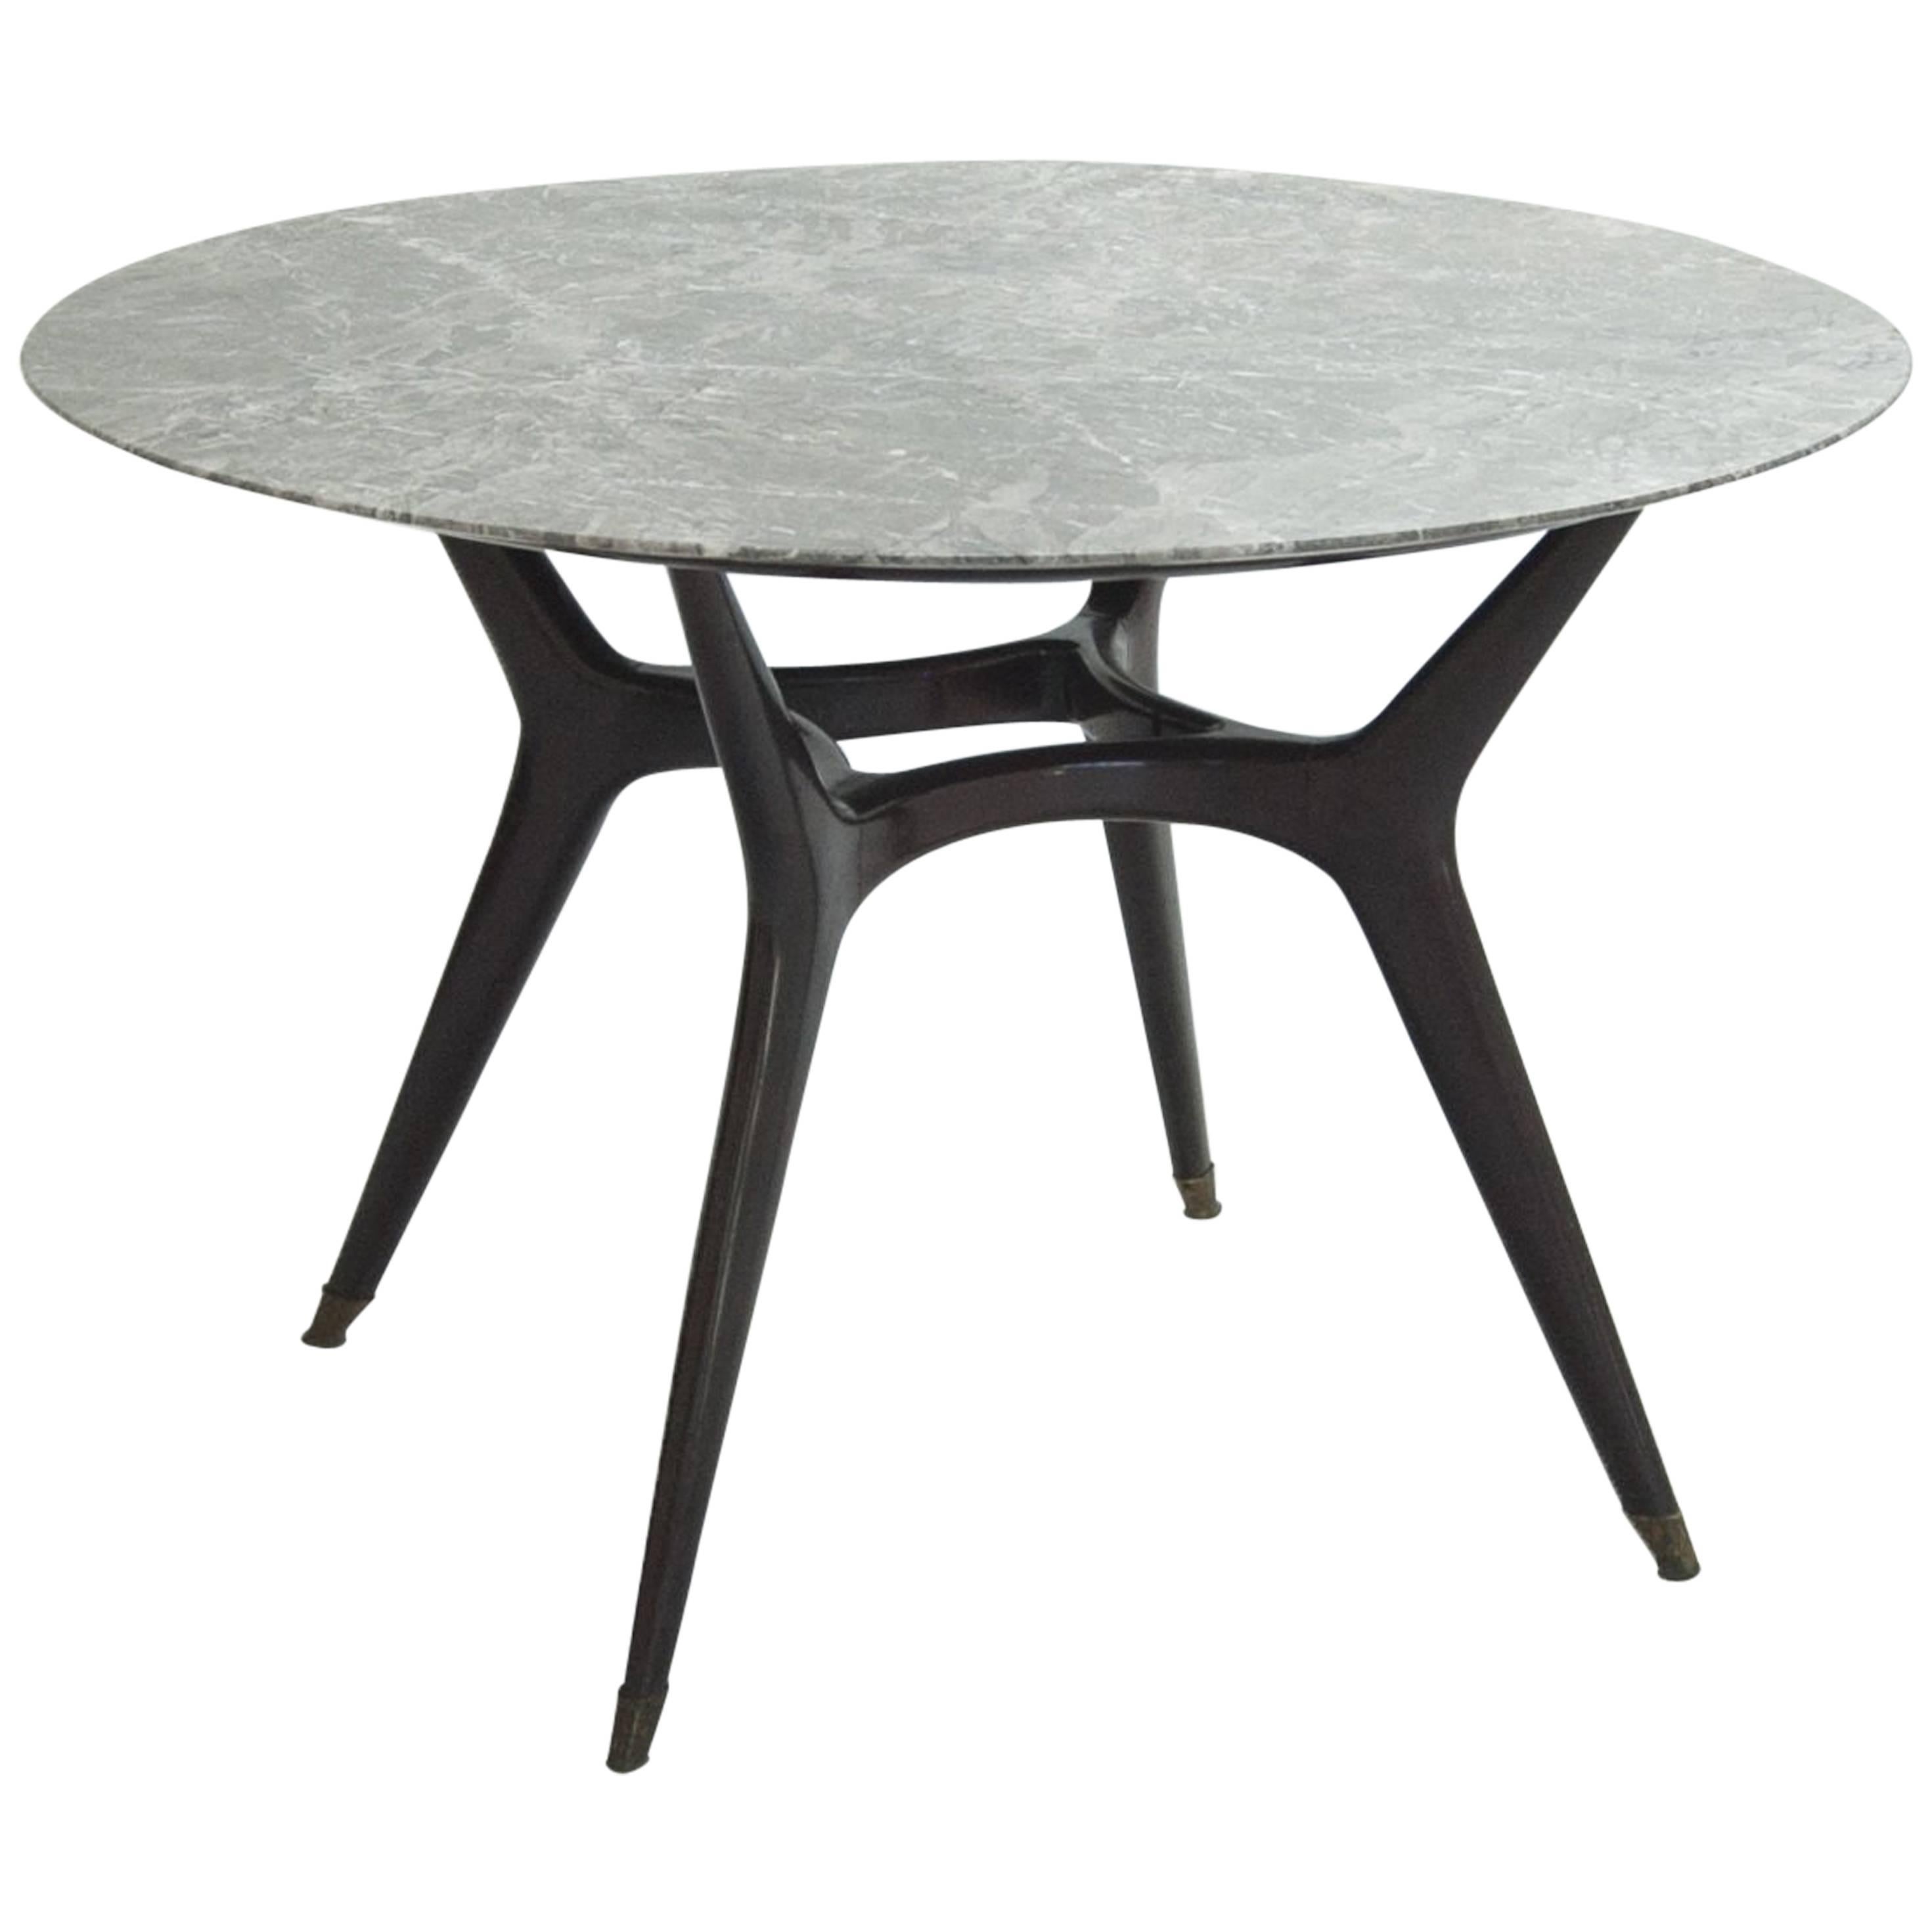 20th Century Italian Marble and wood Circular Dining Table For Sale